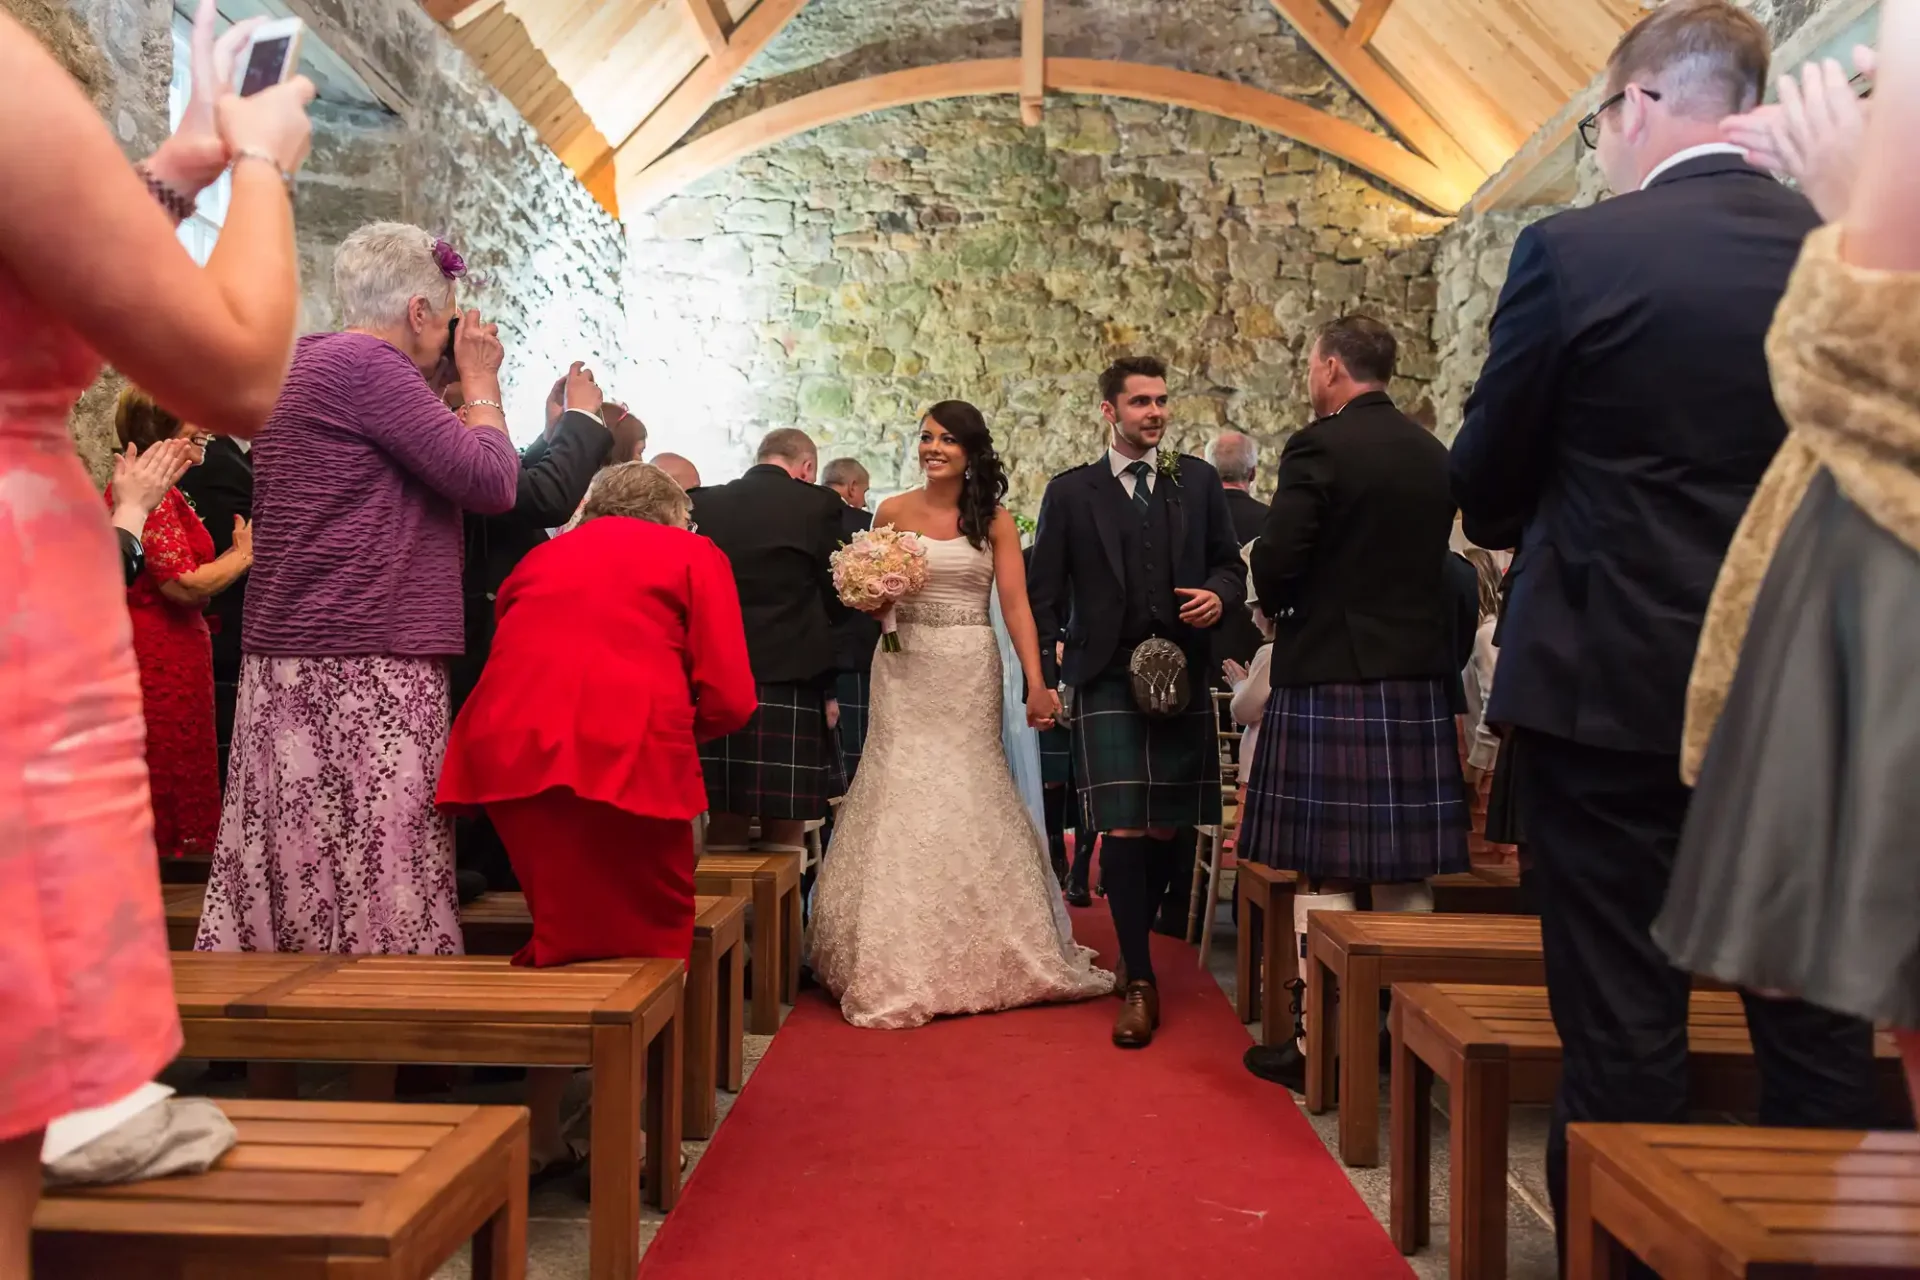 A bride and groom happily walk down the aisle of a stone-walled room, surrounded by guests, some wearing traditional scottish kilts.